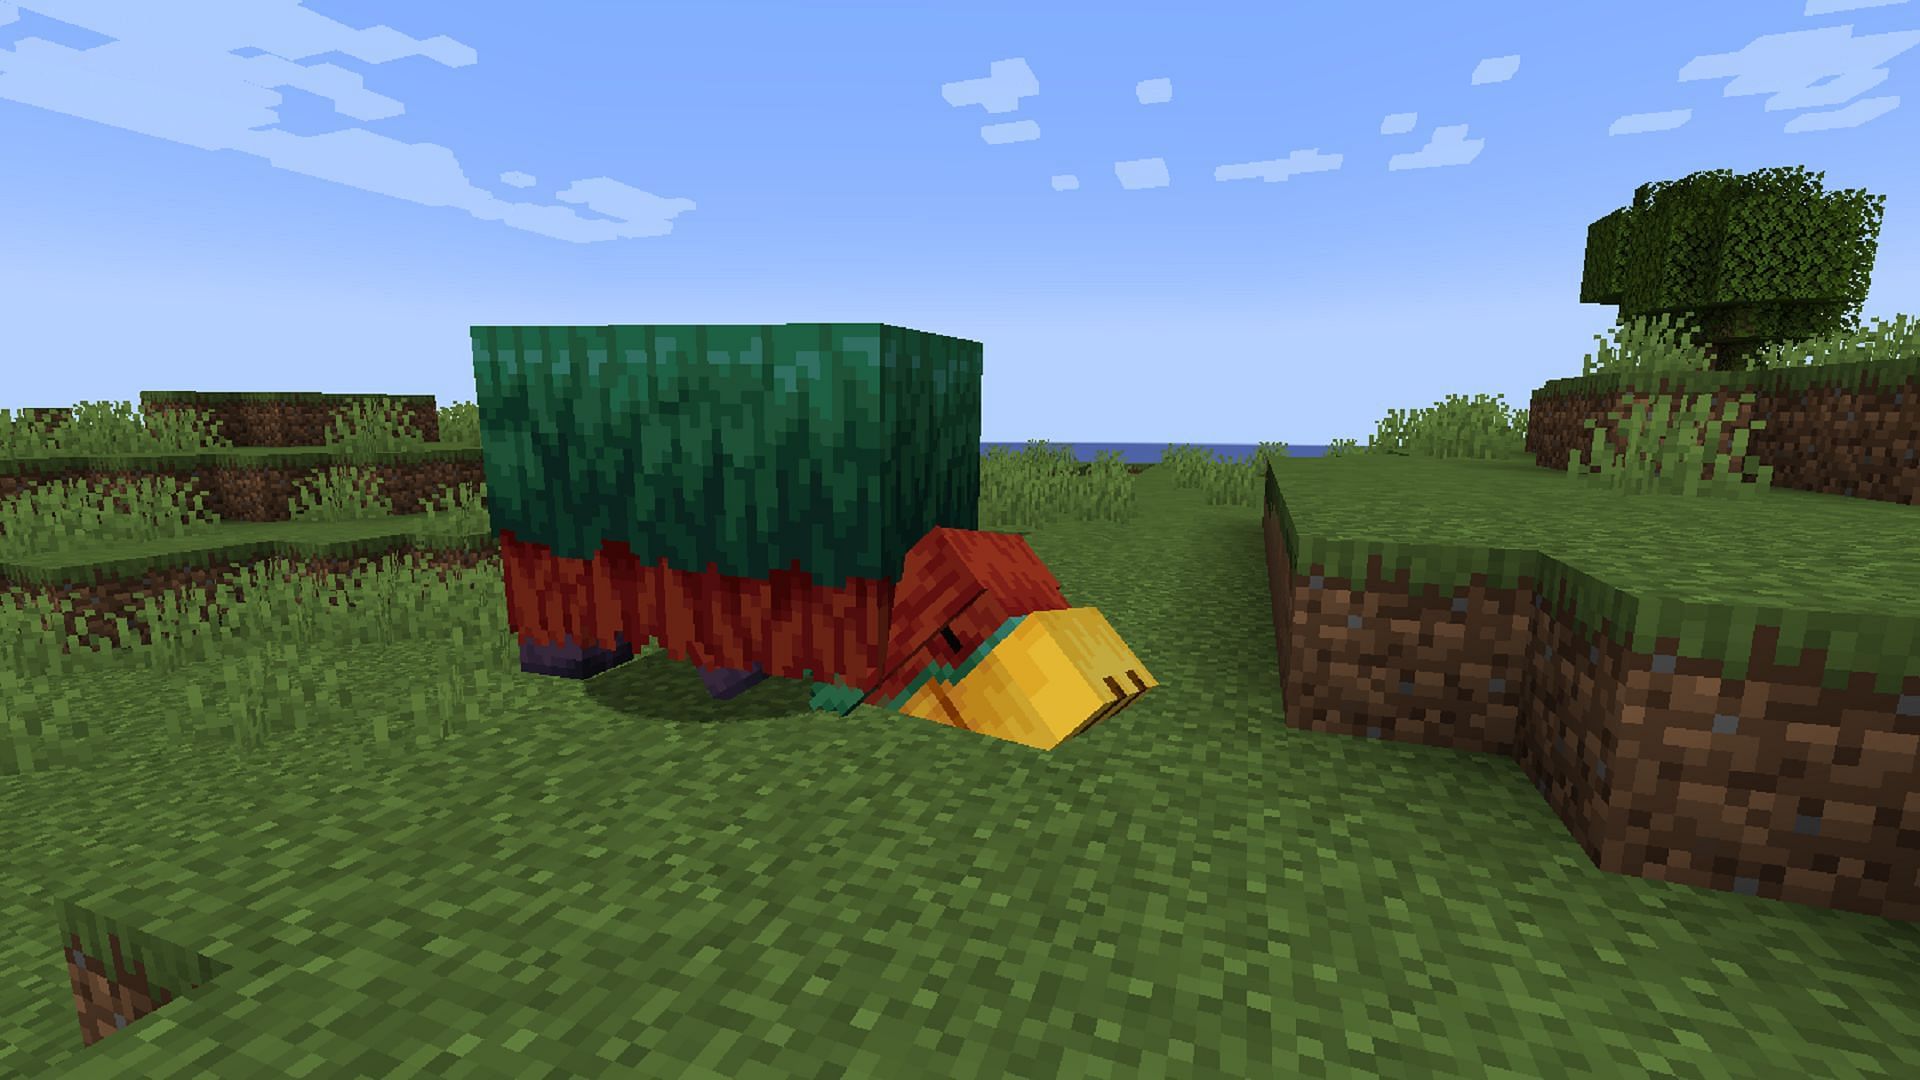 A sniffer mob hunting for seeds in Minecraft (Image via Mojang)